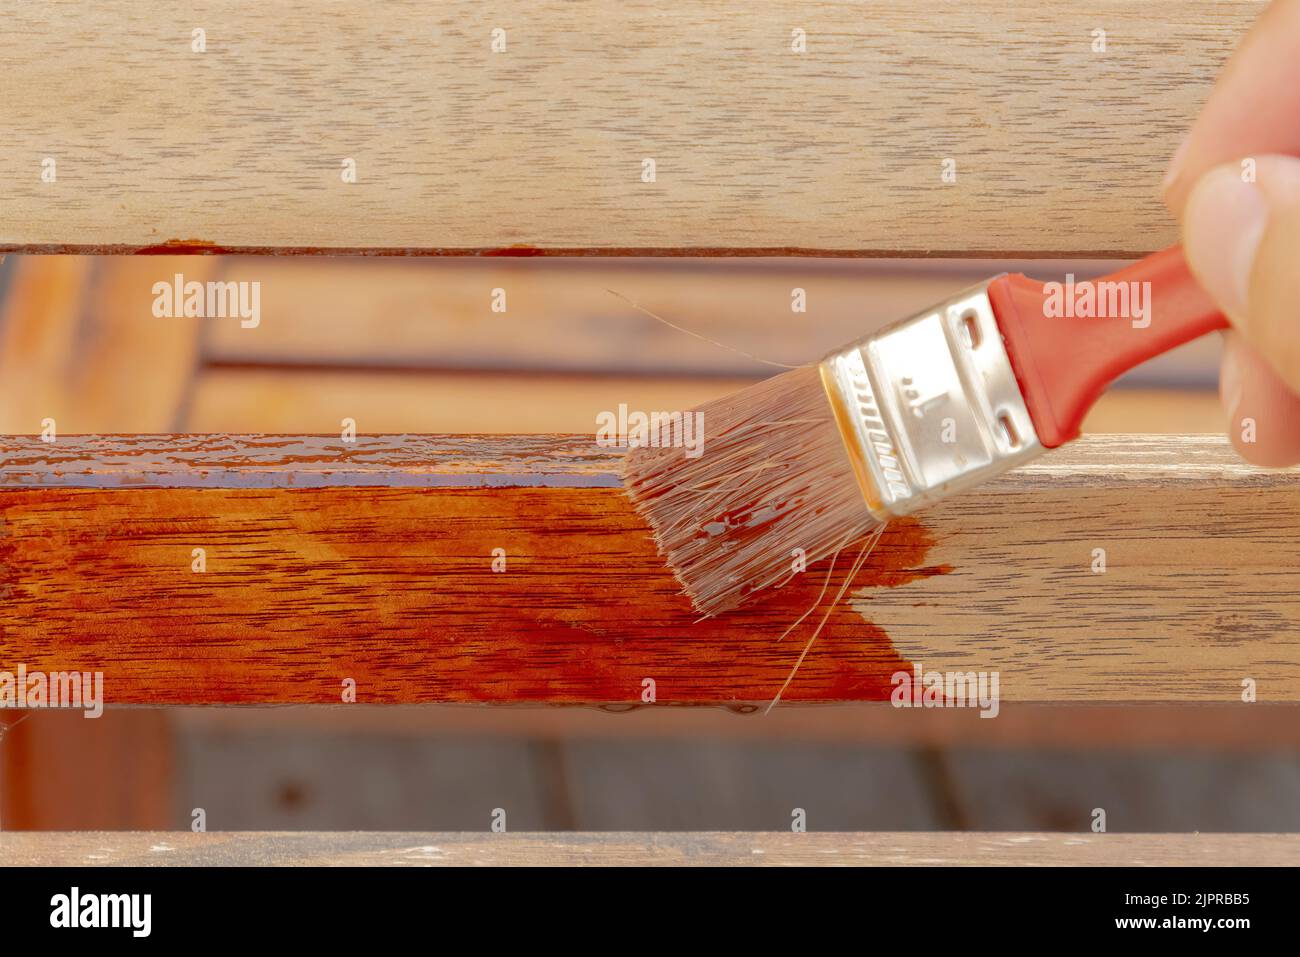 A wooden surface getting a red wood coating transparent penetrating oil. Stock Photo